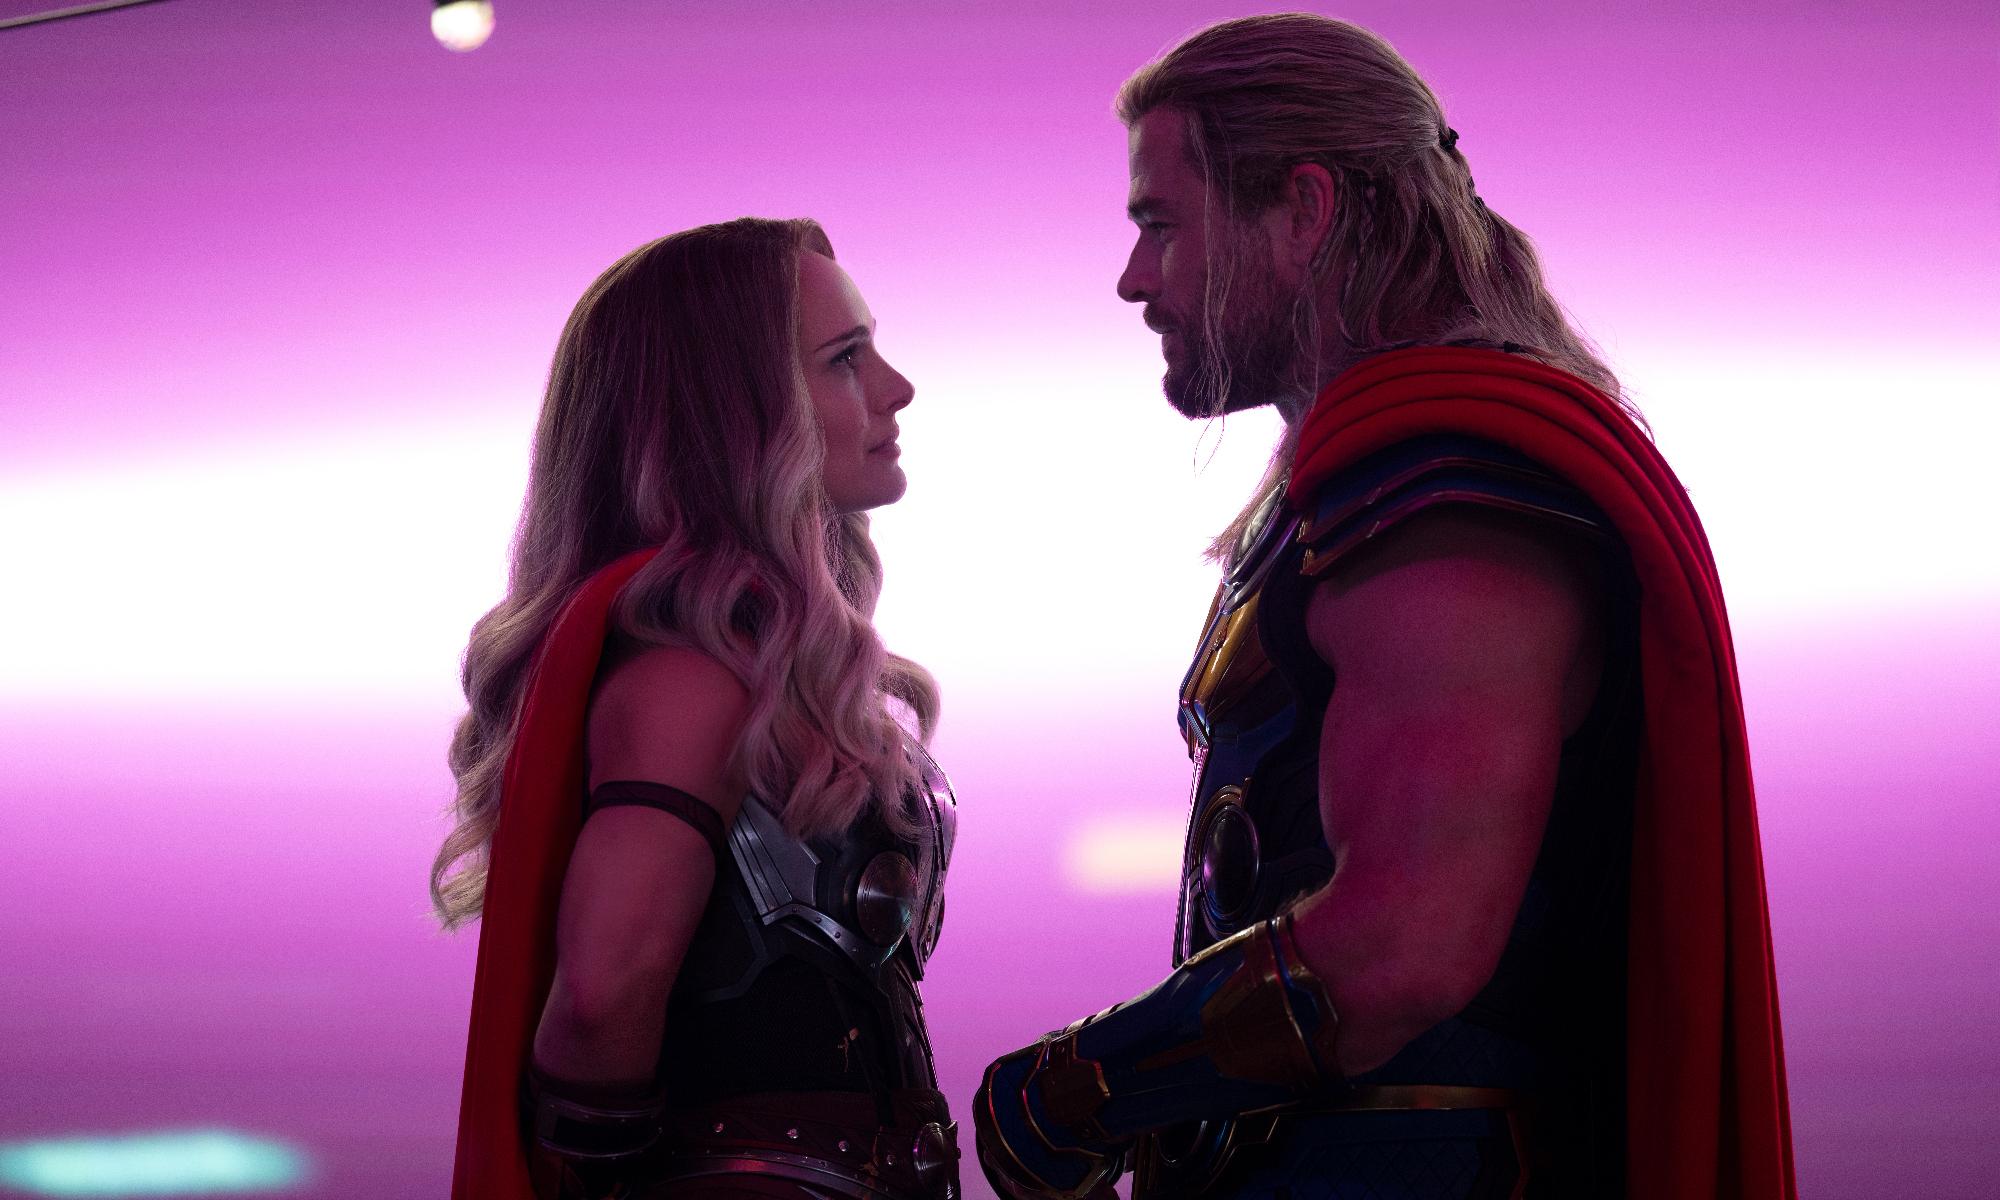 15 Highlights The Cast Shared during The 'Thor: Love And Thunder